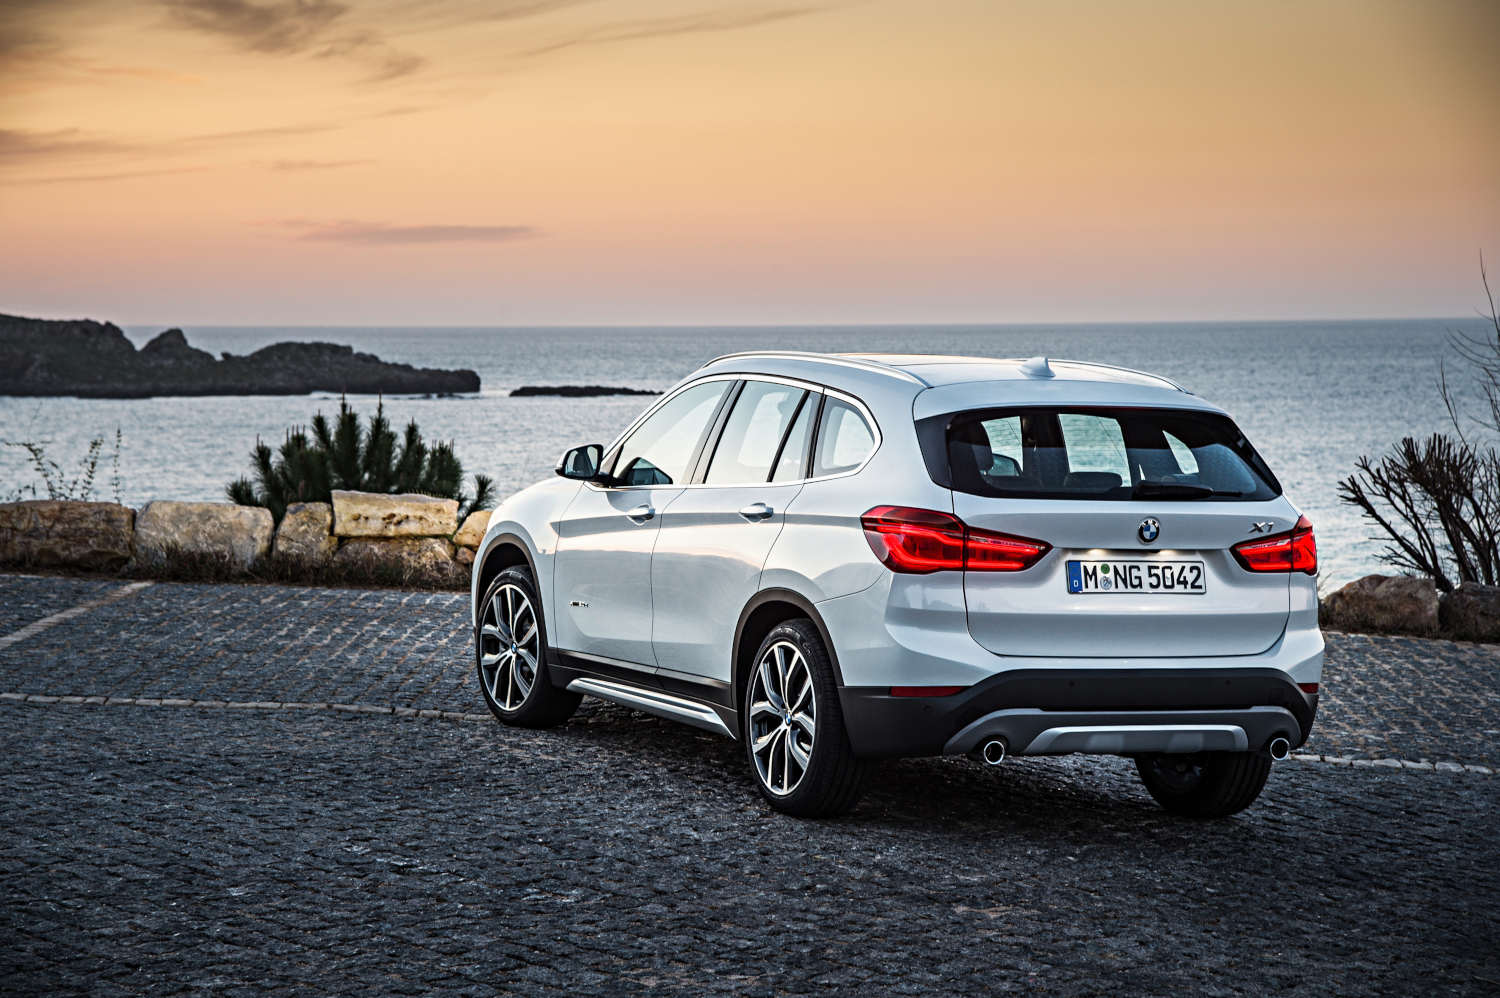 The best used luxury SUVs come from BMW